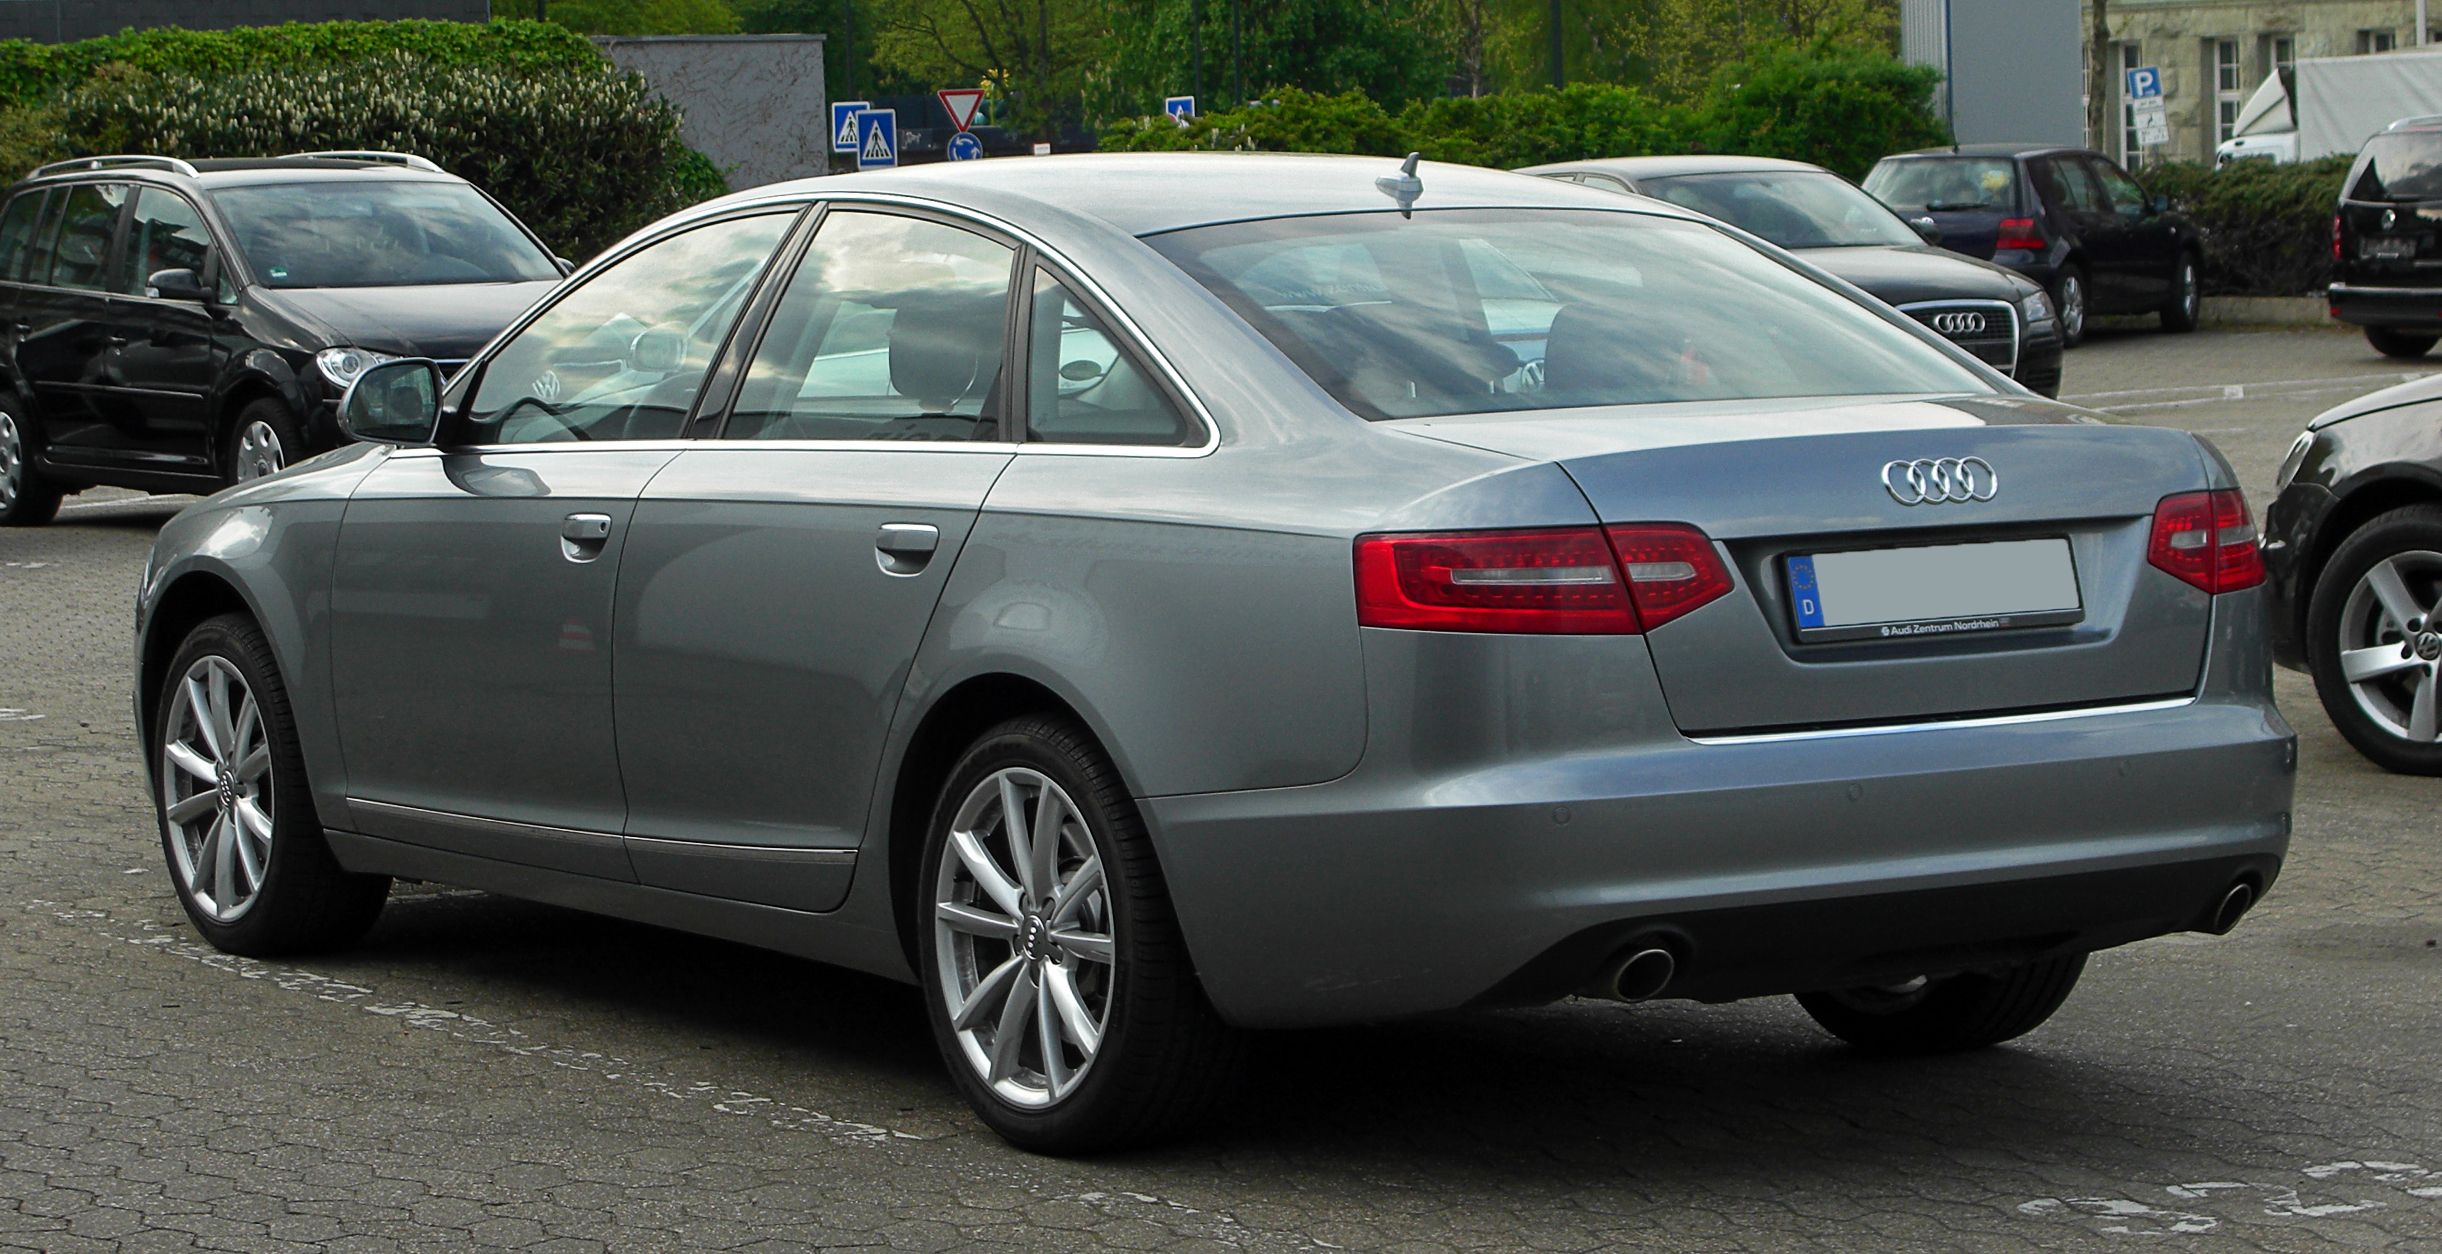 The back of facelifted 2008 Audi A6